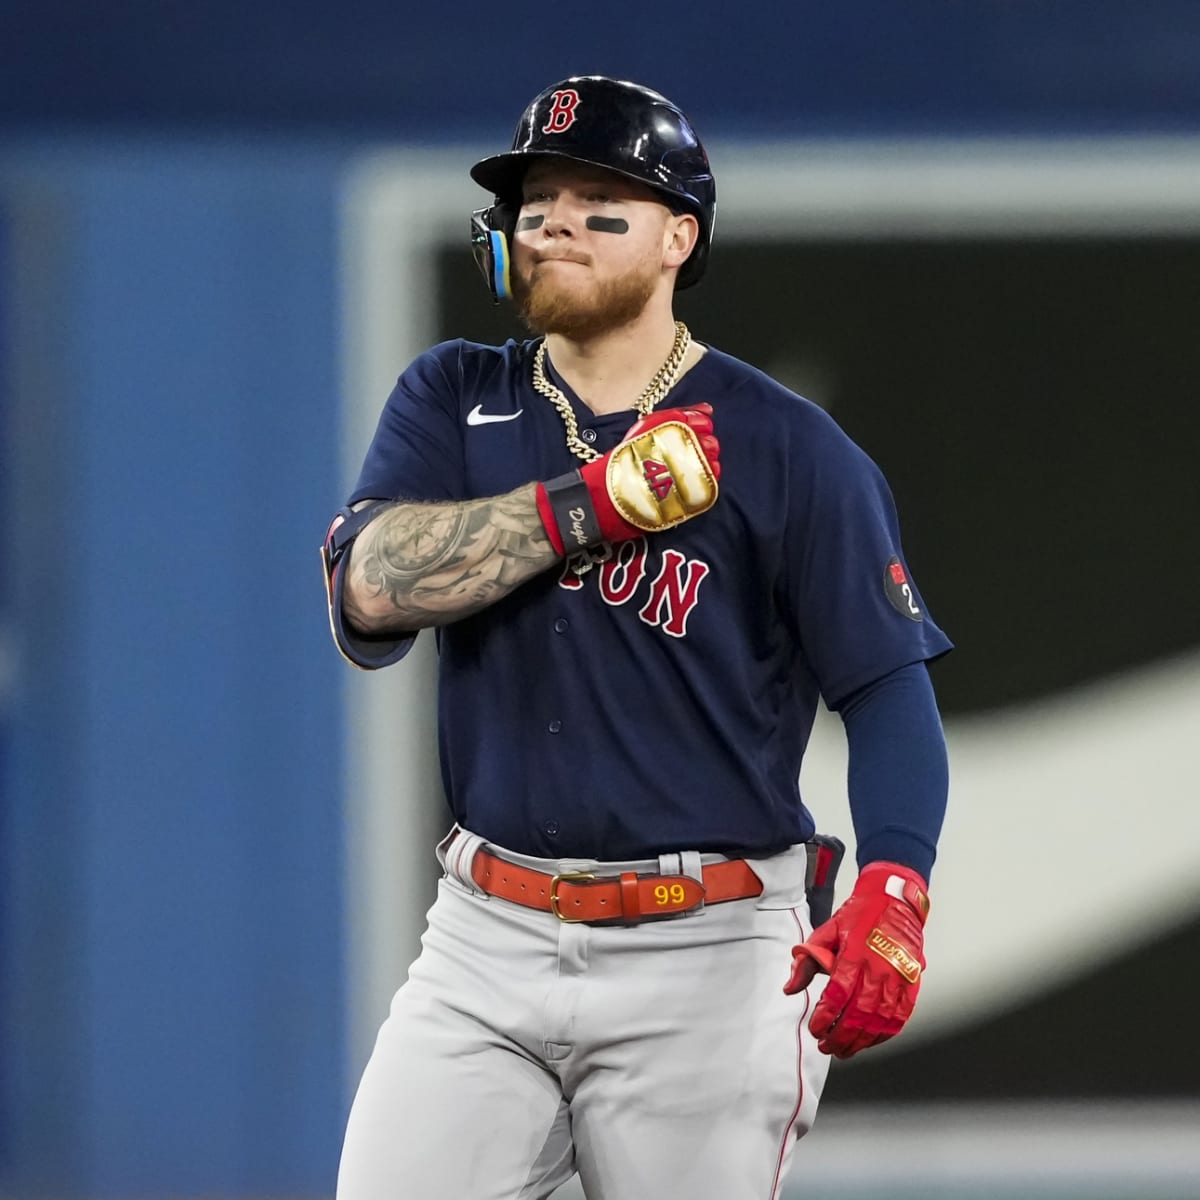 Alex Verdugo Hits Walk-Off Single For Red Sox in Comeback Win Over Yankees  - Fastball